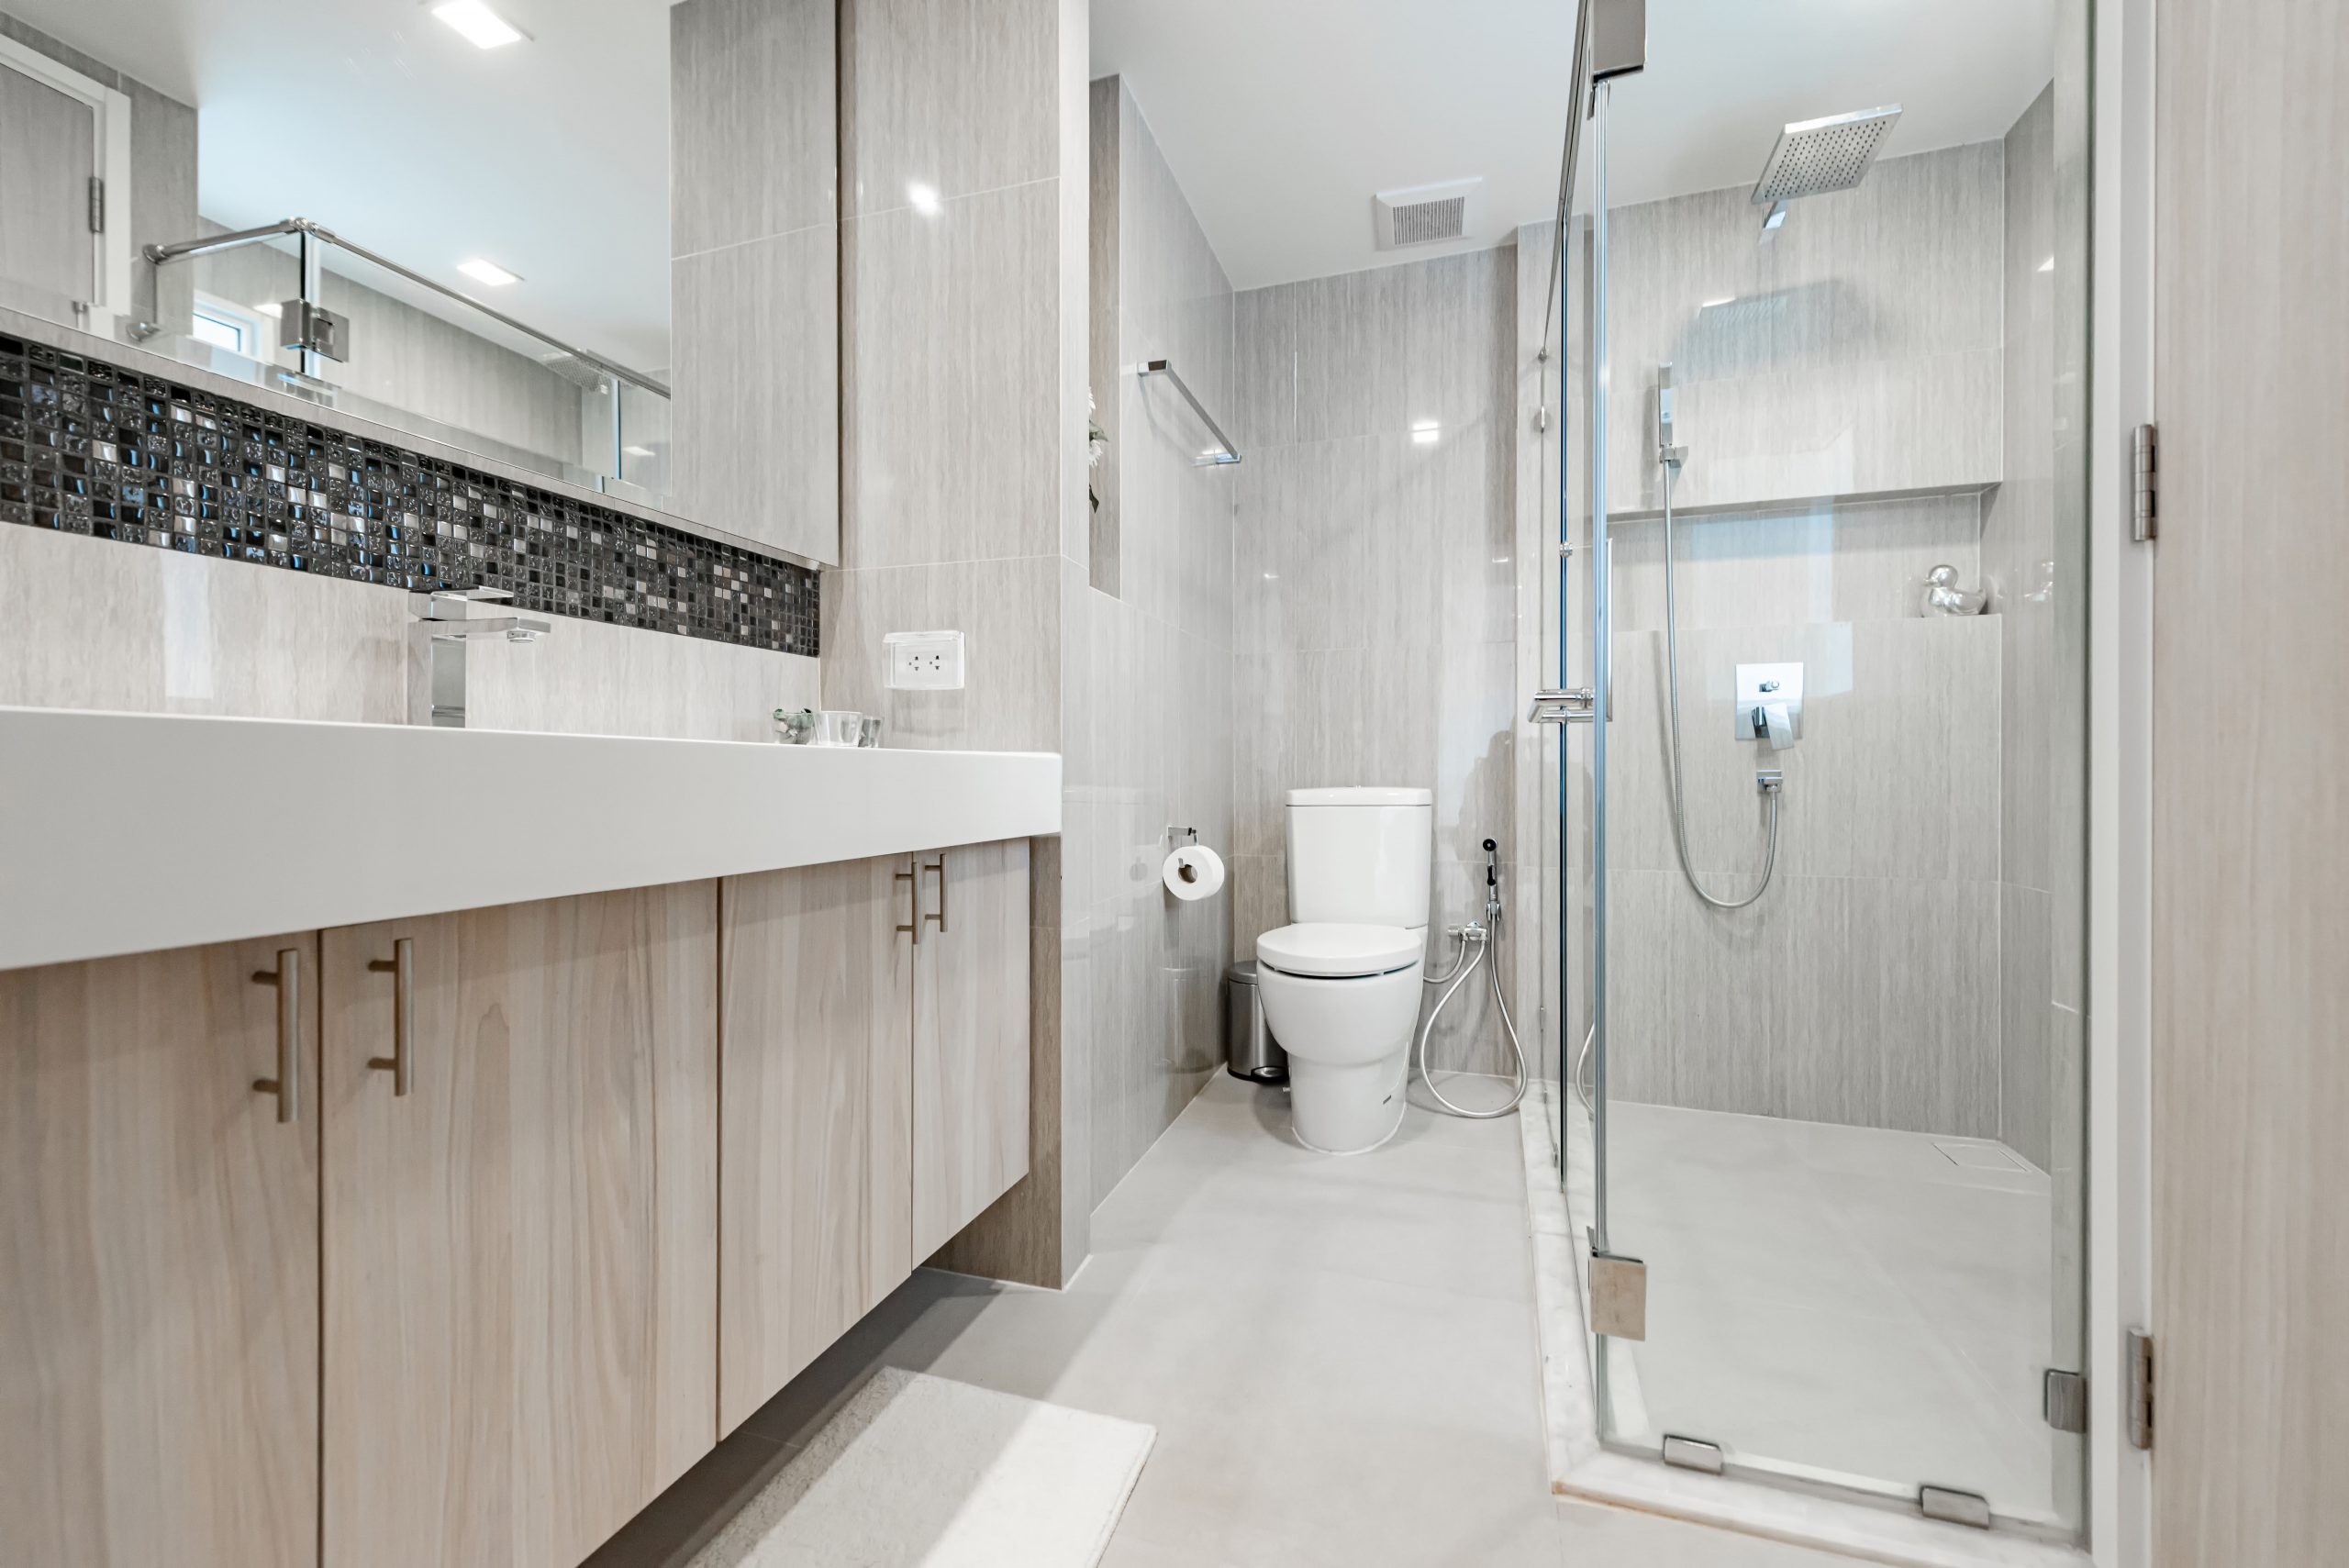 Lack of storage in a bathroom can lead to a multitude of problems. Without proper storage solutions, your bathroom can quickly become cluttered and disorganized, making it difficult to find and access essential items. Not only does this create a chaotic and messy environment, but it also hinders your ability to efficiently use the space.